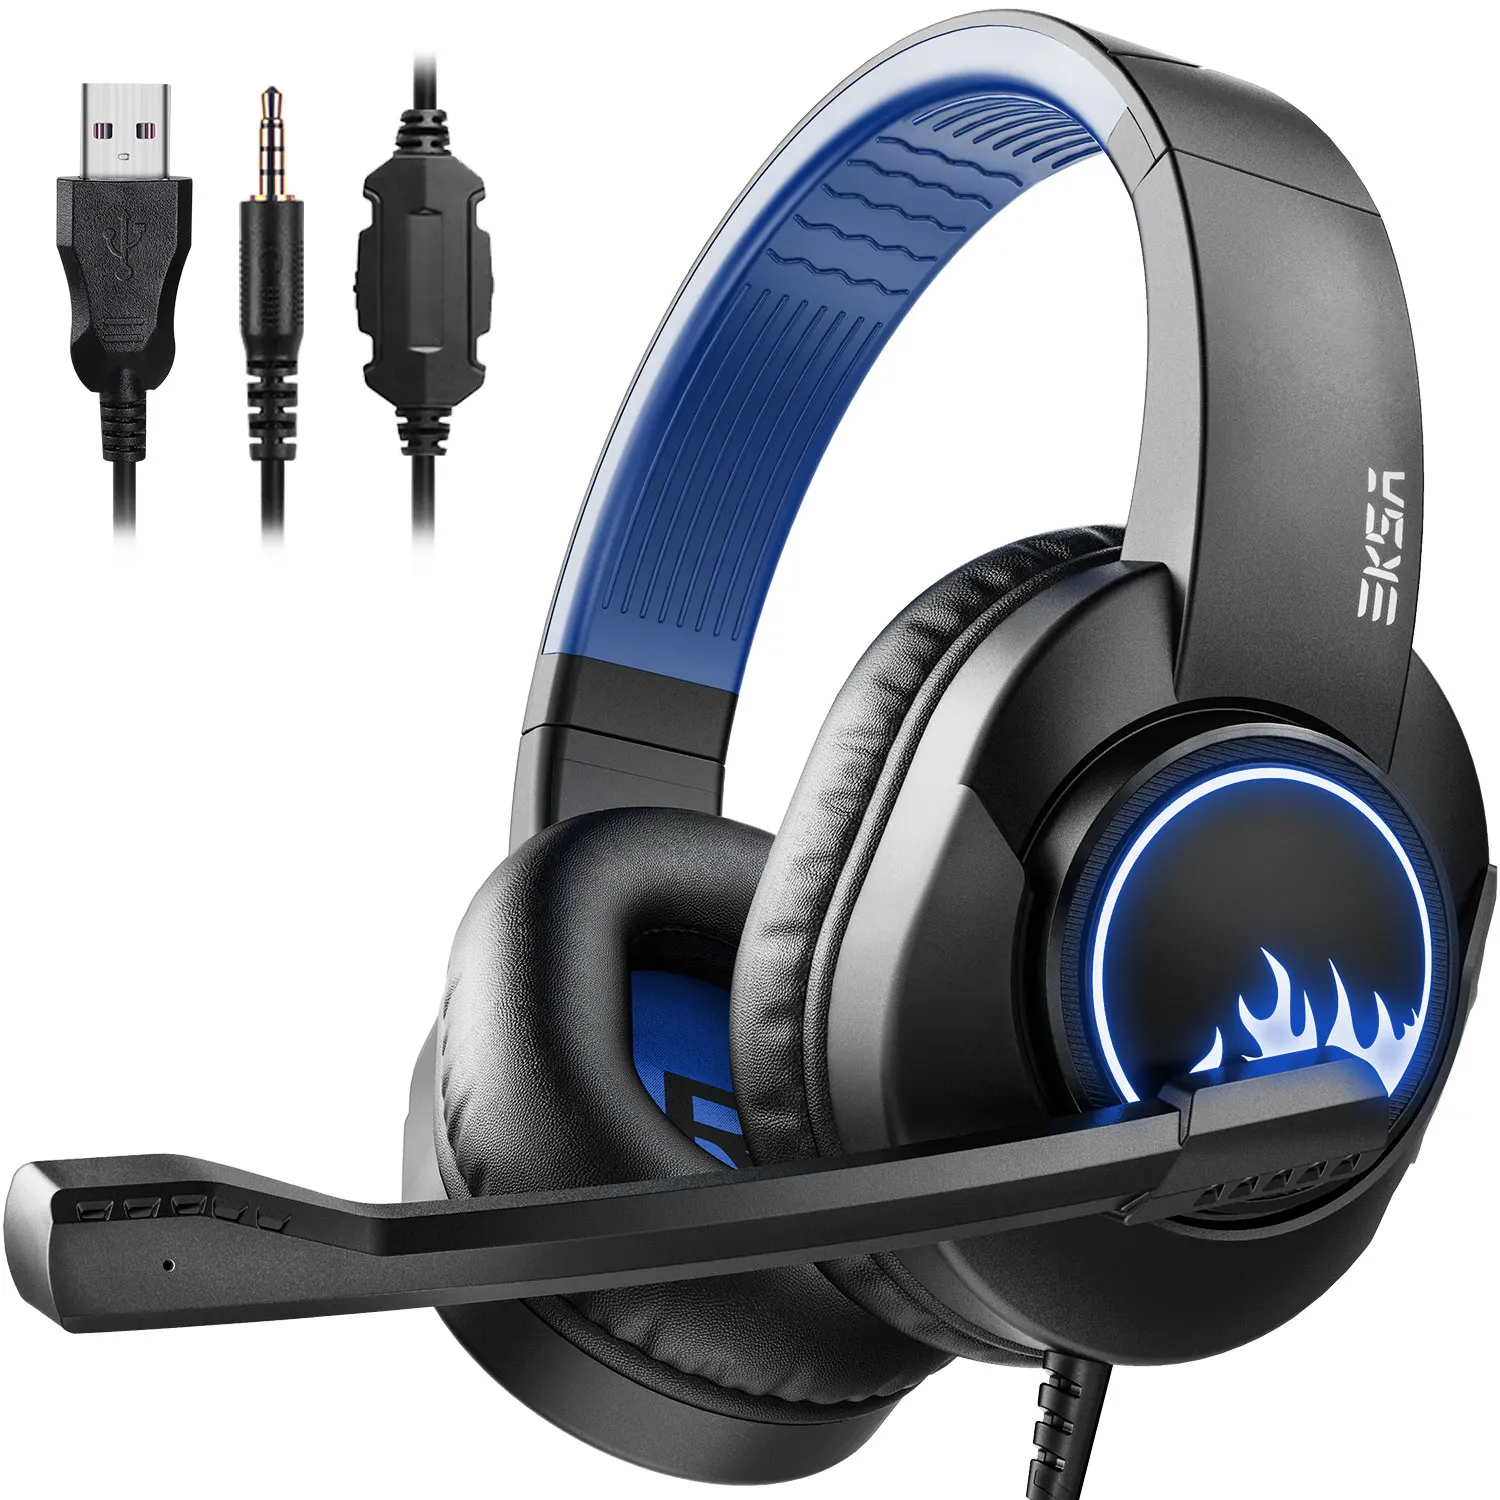 

EKSA T8 PC Gaming Headset Gamer 3.5mm Stereo Wired Headphones with Microphone Noise Cancelling LED Lights For PS4/Xbox one/Phone